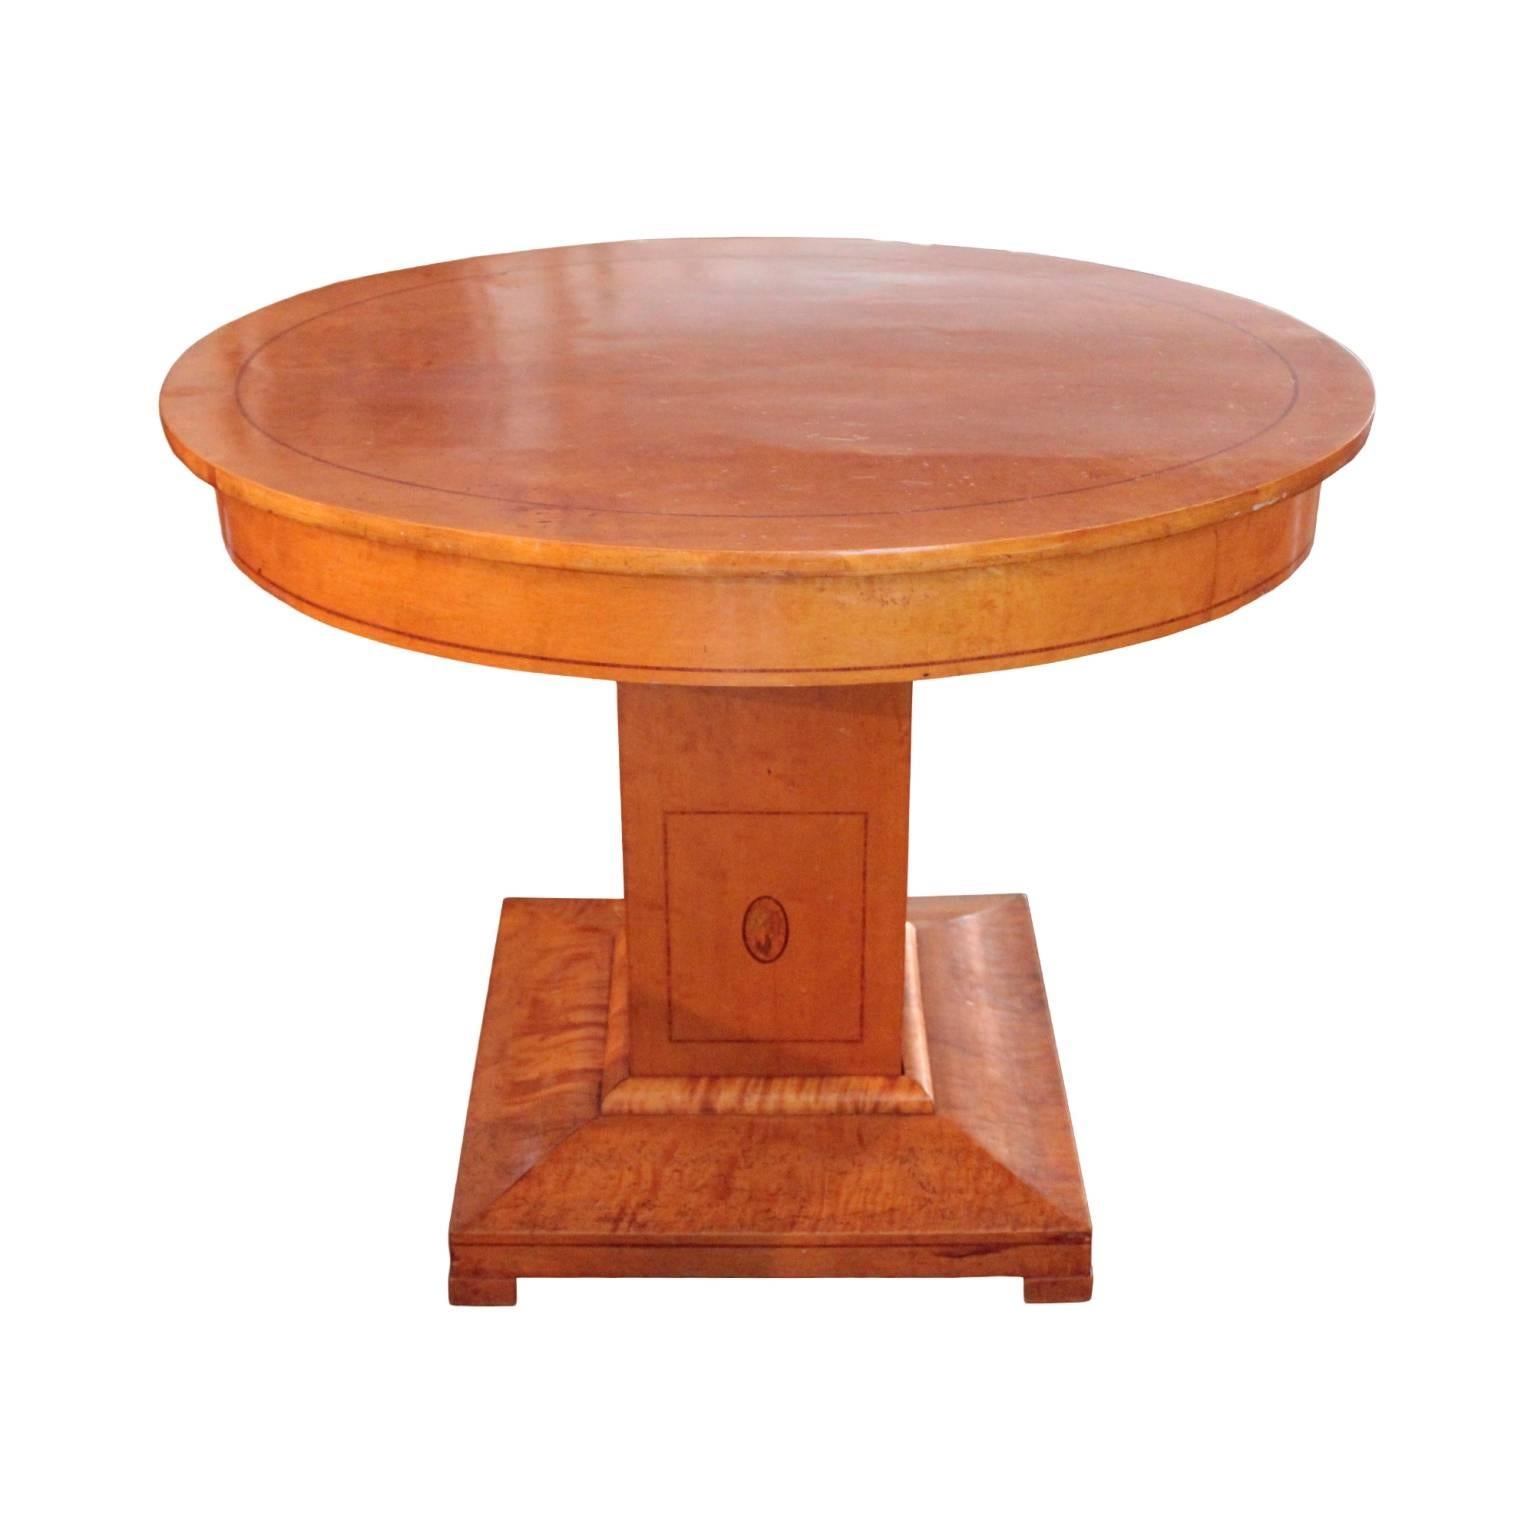 Table top and apron inlaid with rosewood banding. Raised on a cuboid pedestal decorated on all four sides with rectangular frame inlay in rosewood corresponding with the rectangular shape of the pedestal and smaller oval frame inlay in rosewood